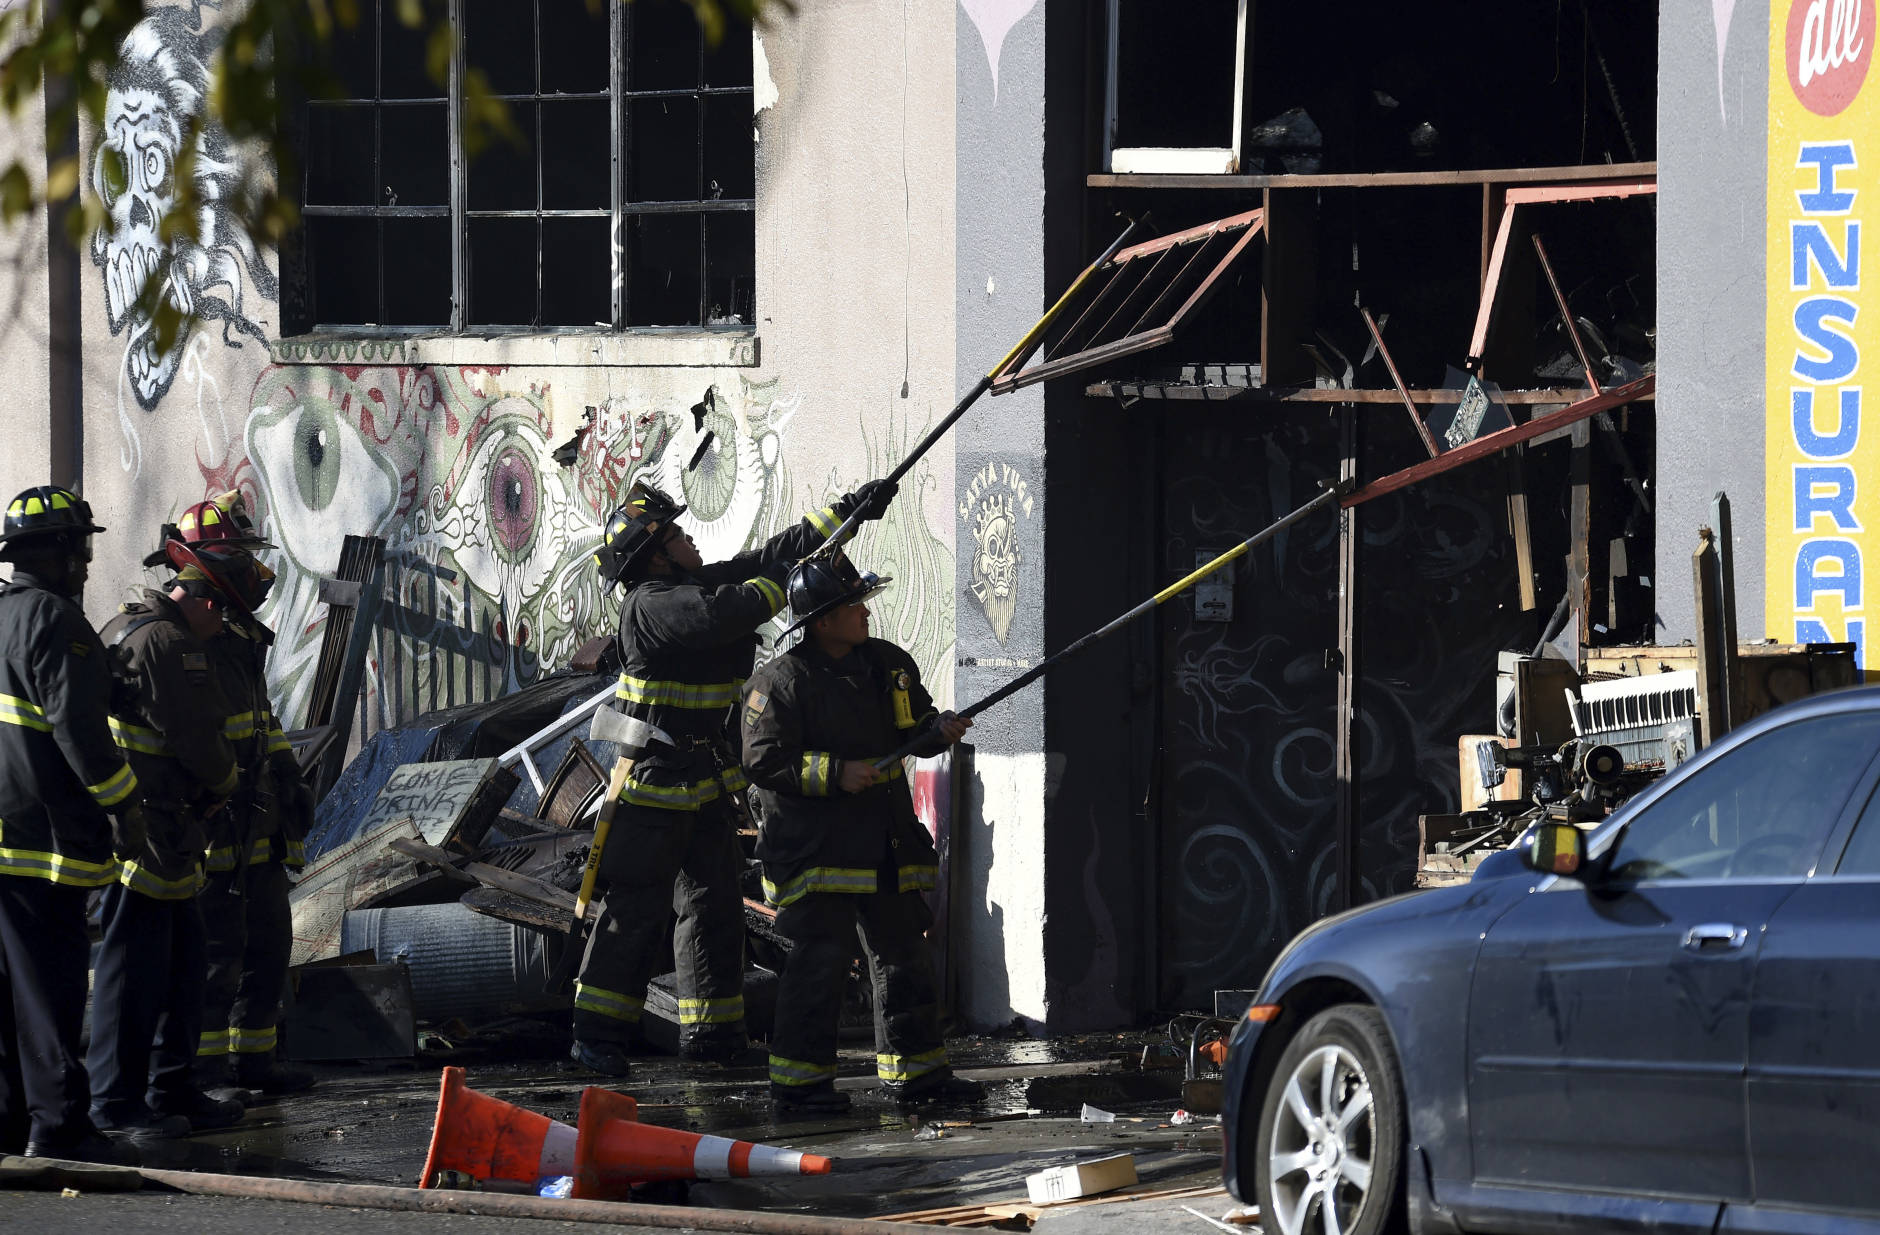 Firefighters clear an entry to a smoldering building after a fire tore through a warehouse party early Saturday, Dec. 3, 2016 in Oakland.   Oakland fire chief Teresa Deloche-Reed said many people were unaccounted for as of Saturday morning and authorities were working to verify who was in the cluttered warehouse when the fire broke out around 11:30 p.m. Friday. (AP Photo/Josh Edelson)